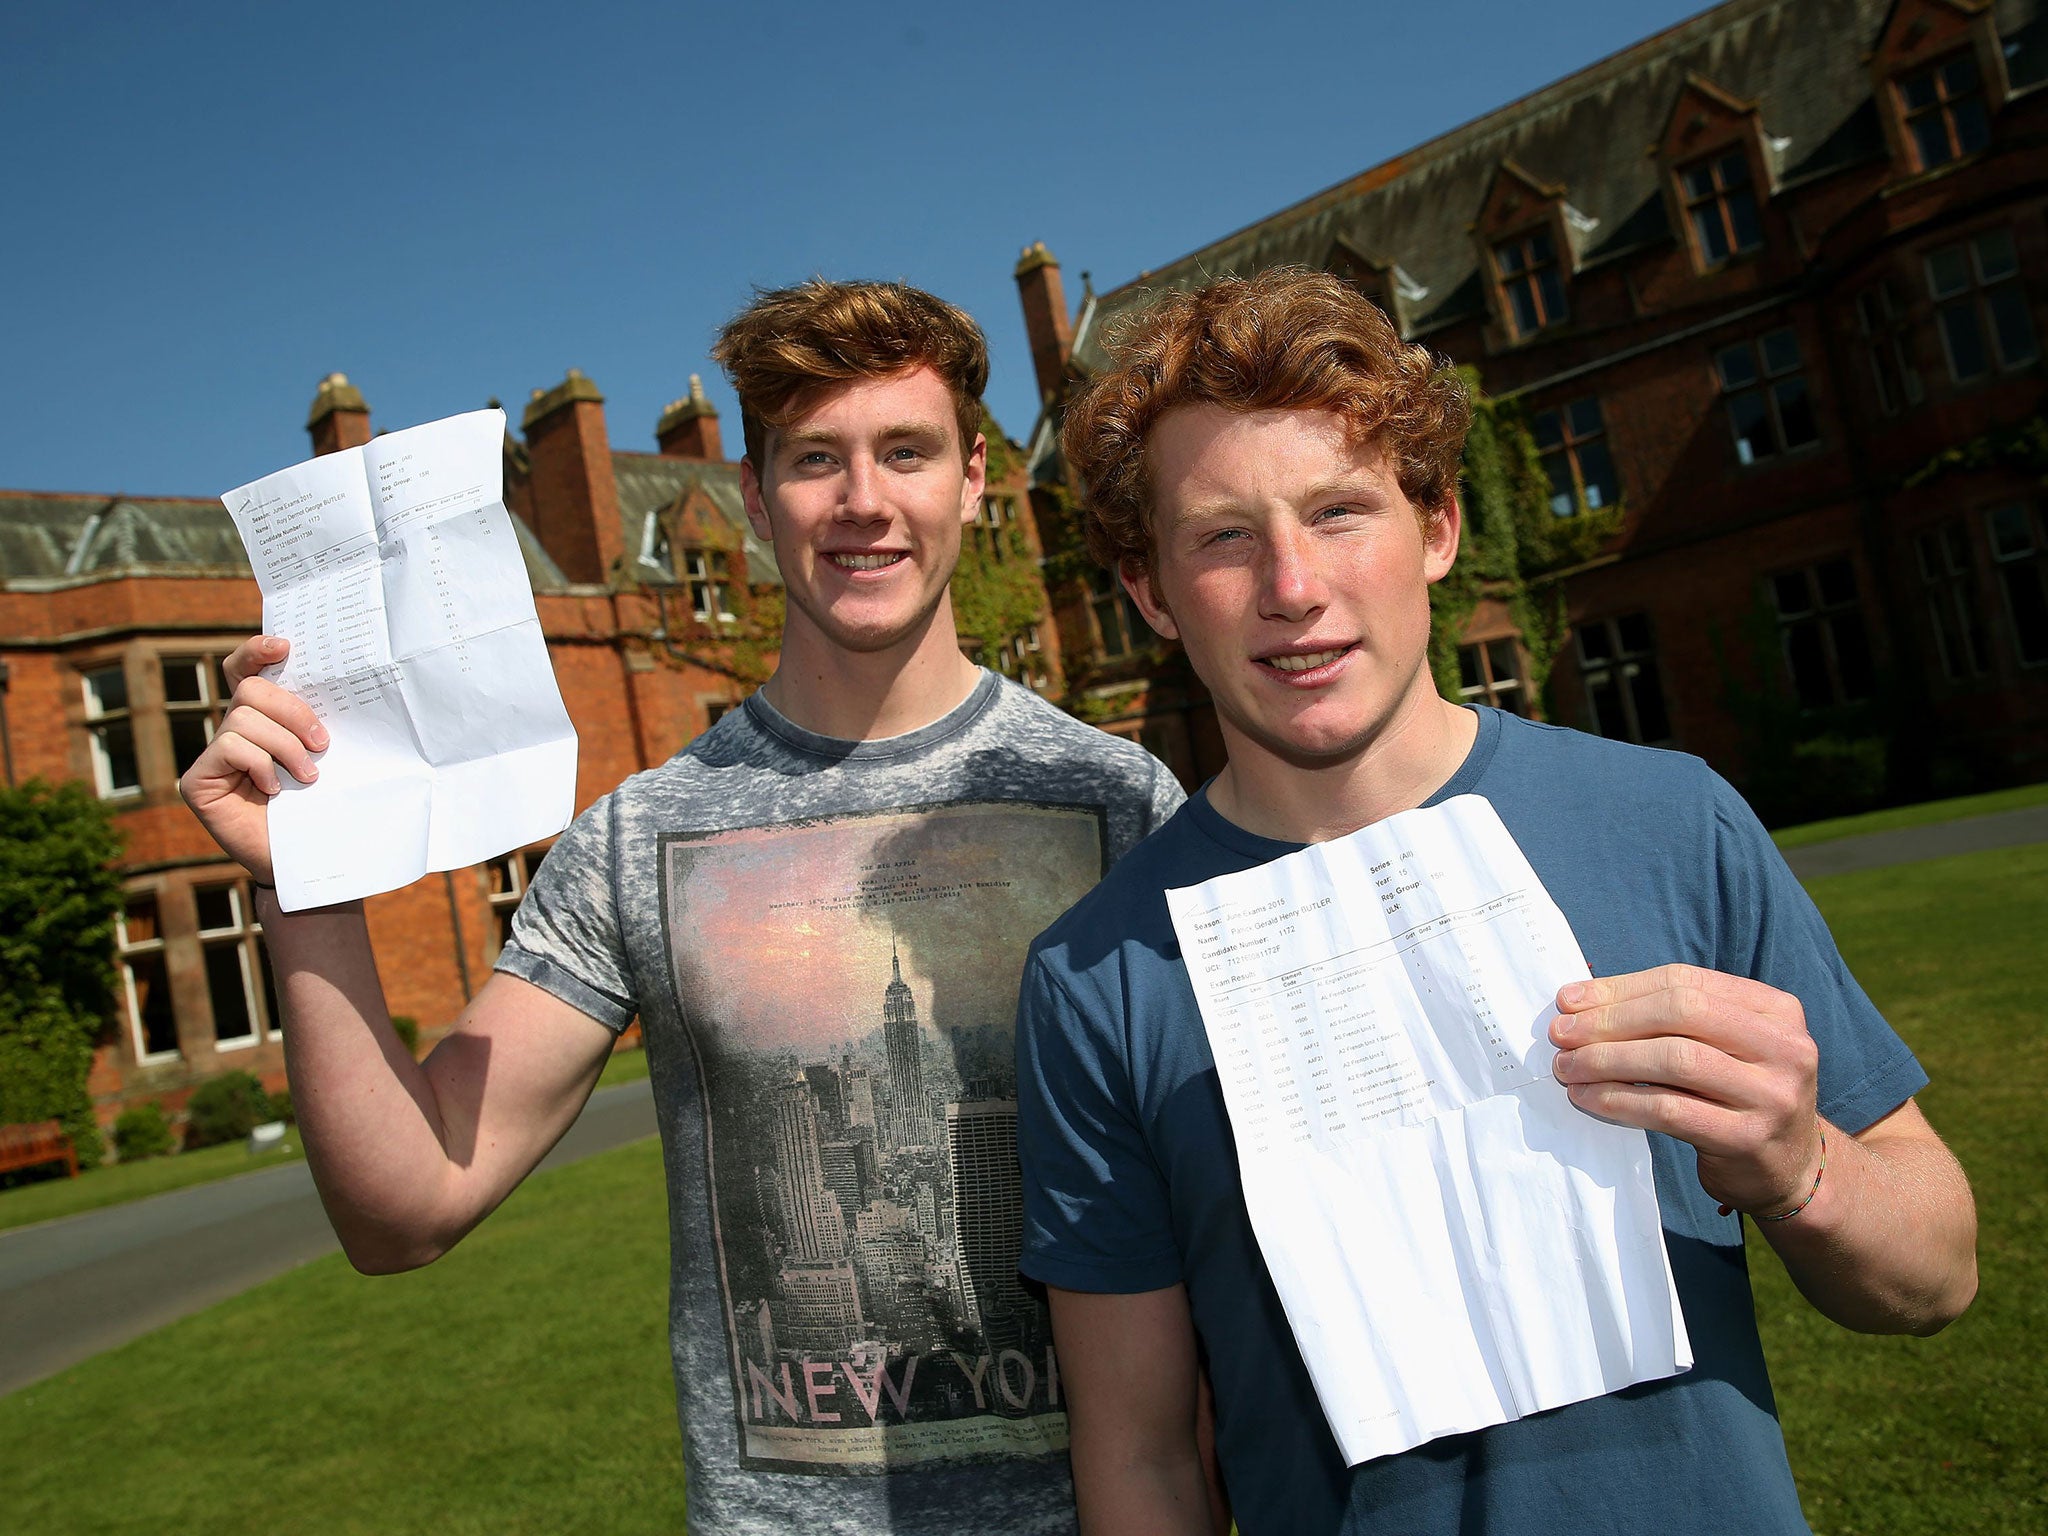 Twins Rory, left, and Patrick Butler celebrate their A-level results at Campbell College in Belfast